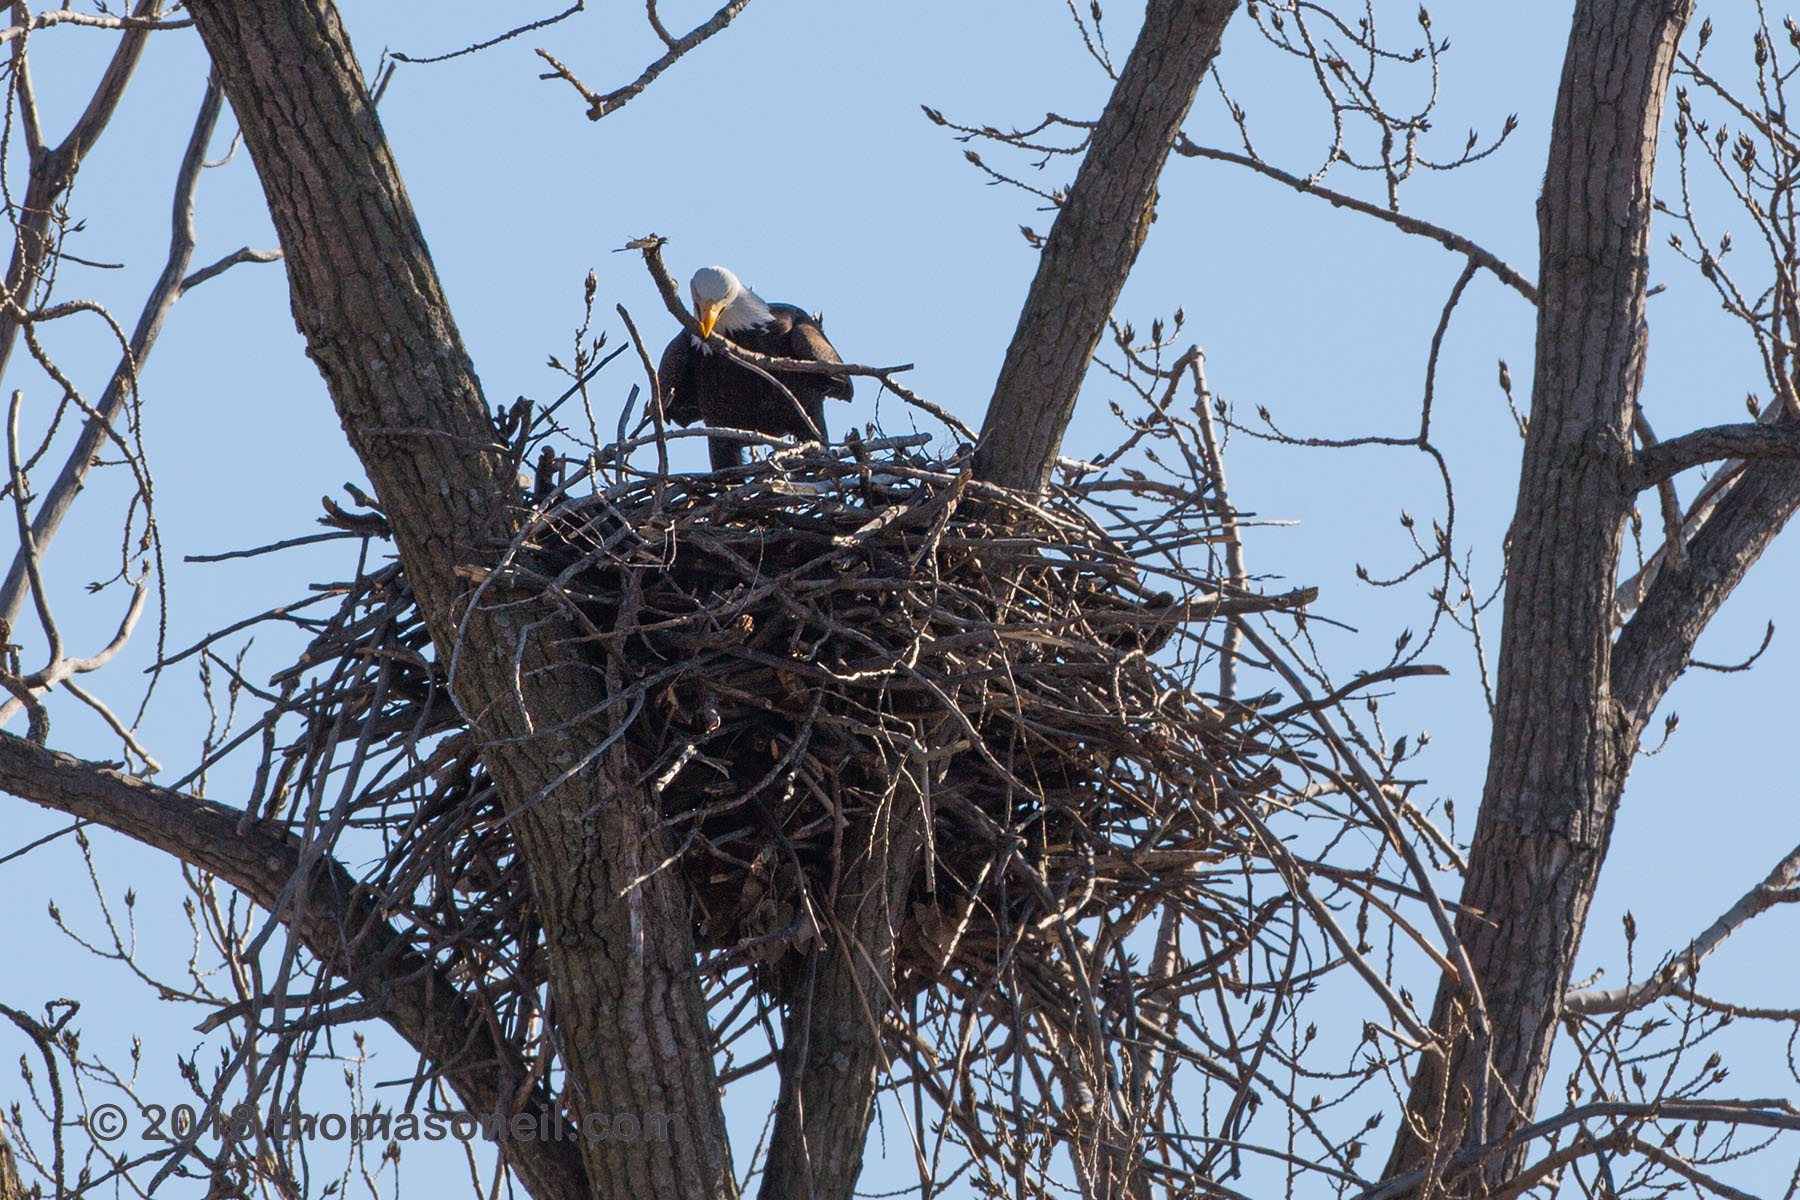 Bald eagle placing stick in the nest, Loess Bluffs National Wildlife Refuge, Missouri.  Click for next photo.